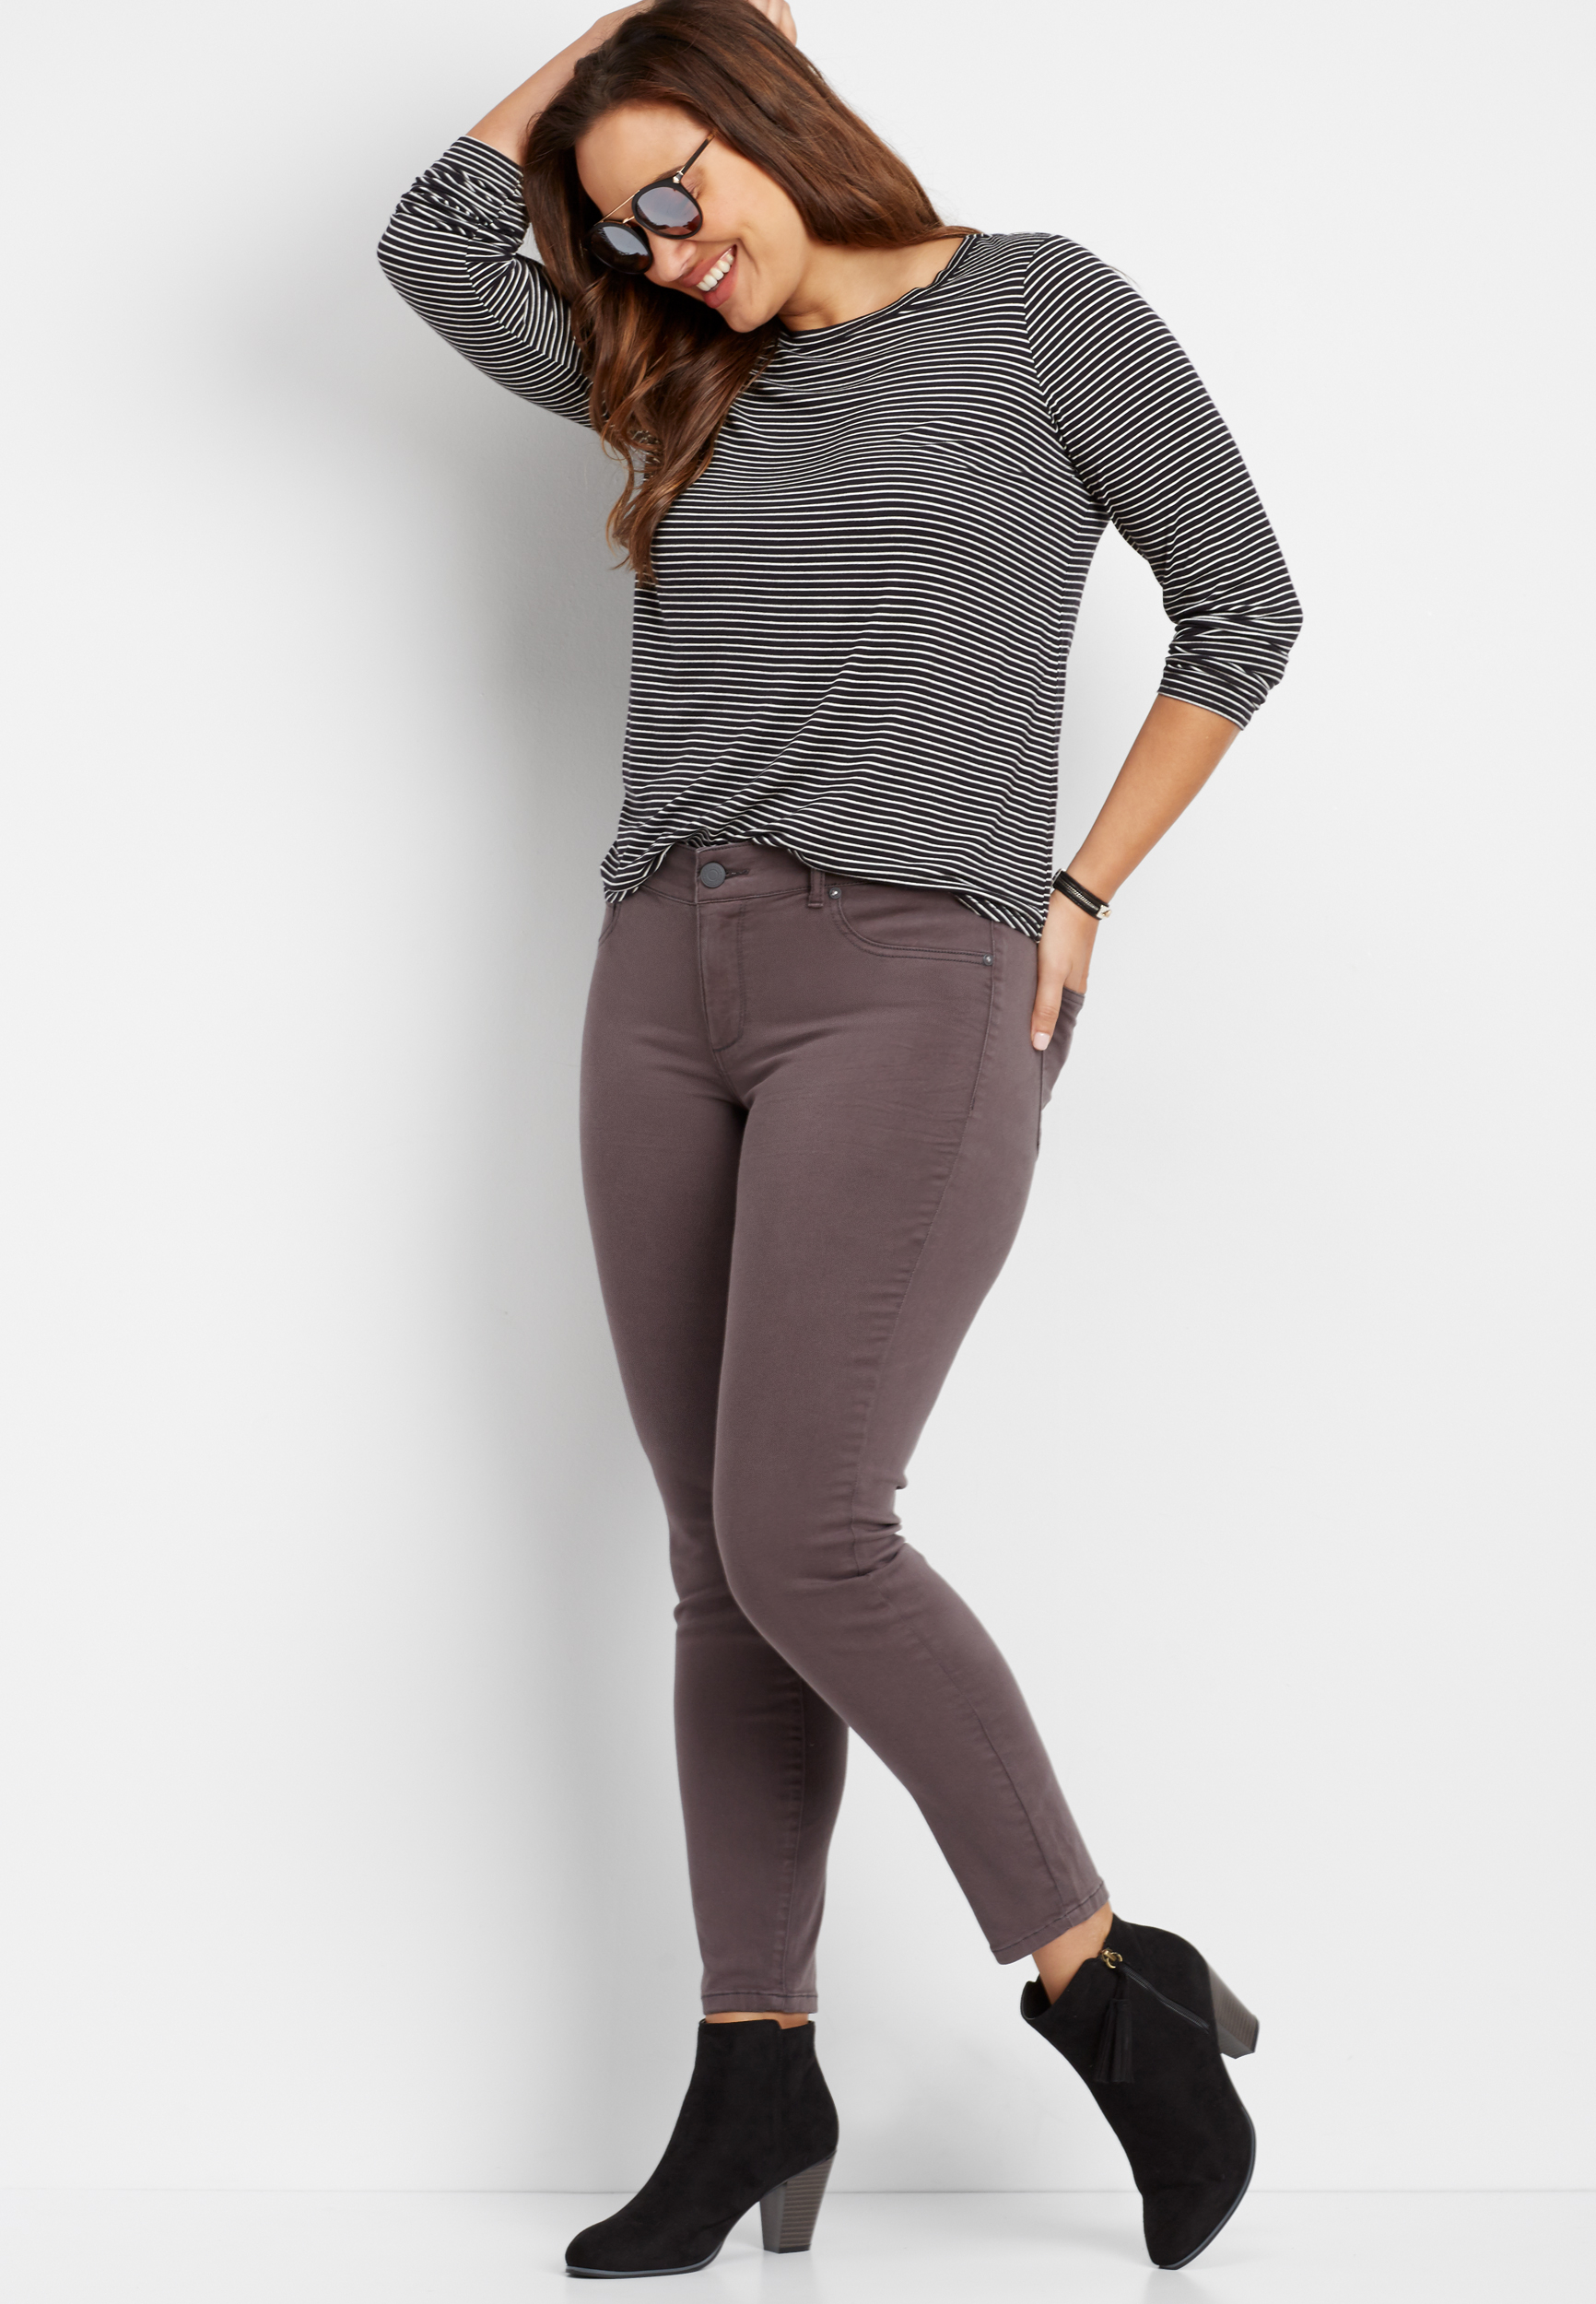 maurices jeggings plus